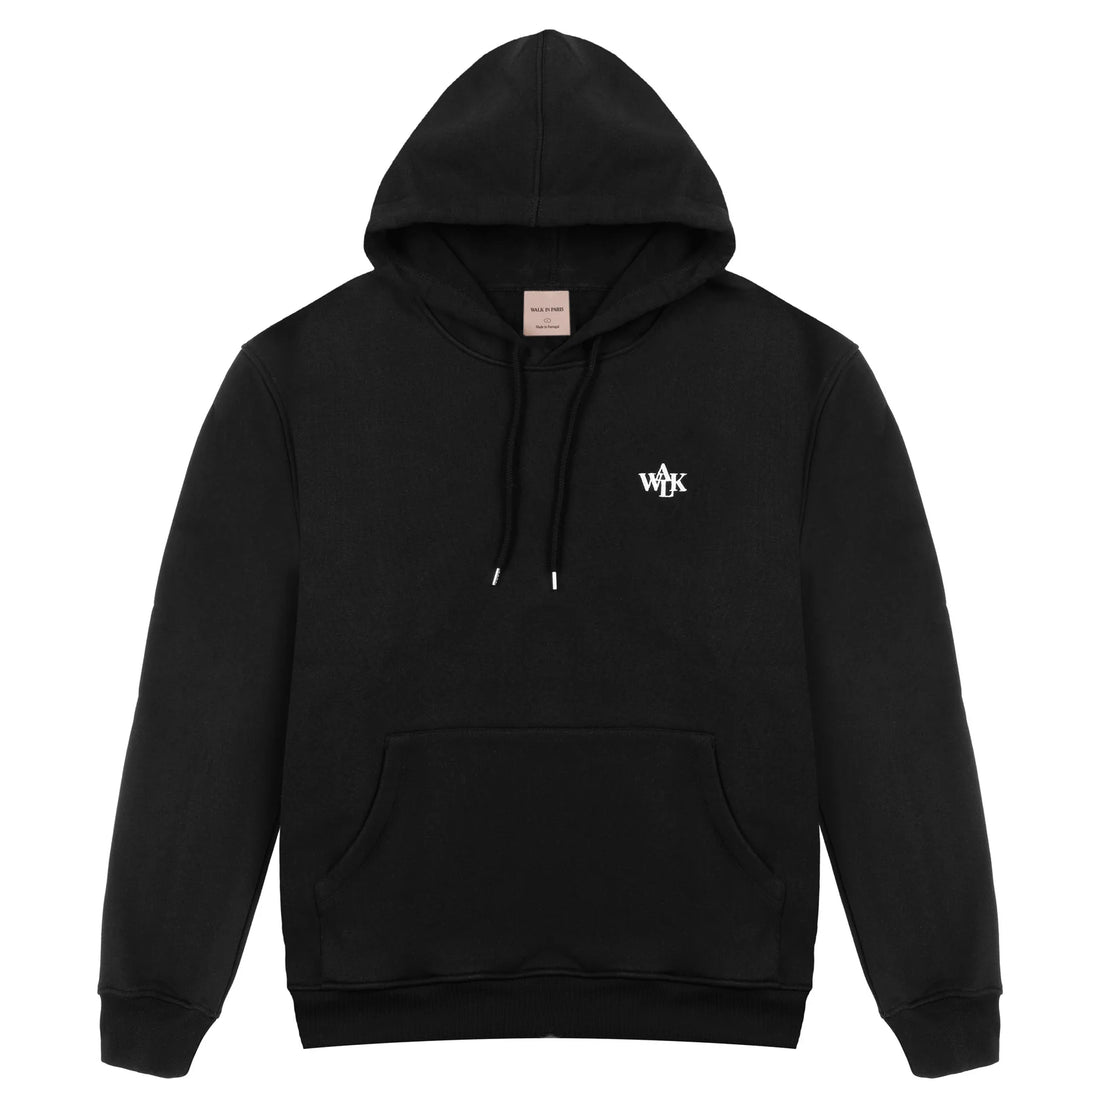 THE BLACK EMBROIDERED CLASSIC HOODIE